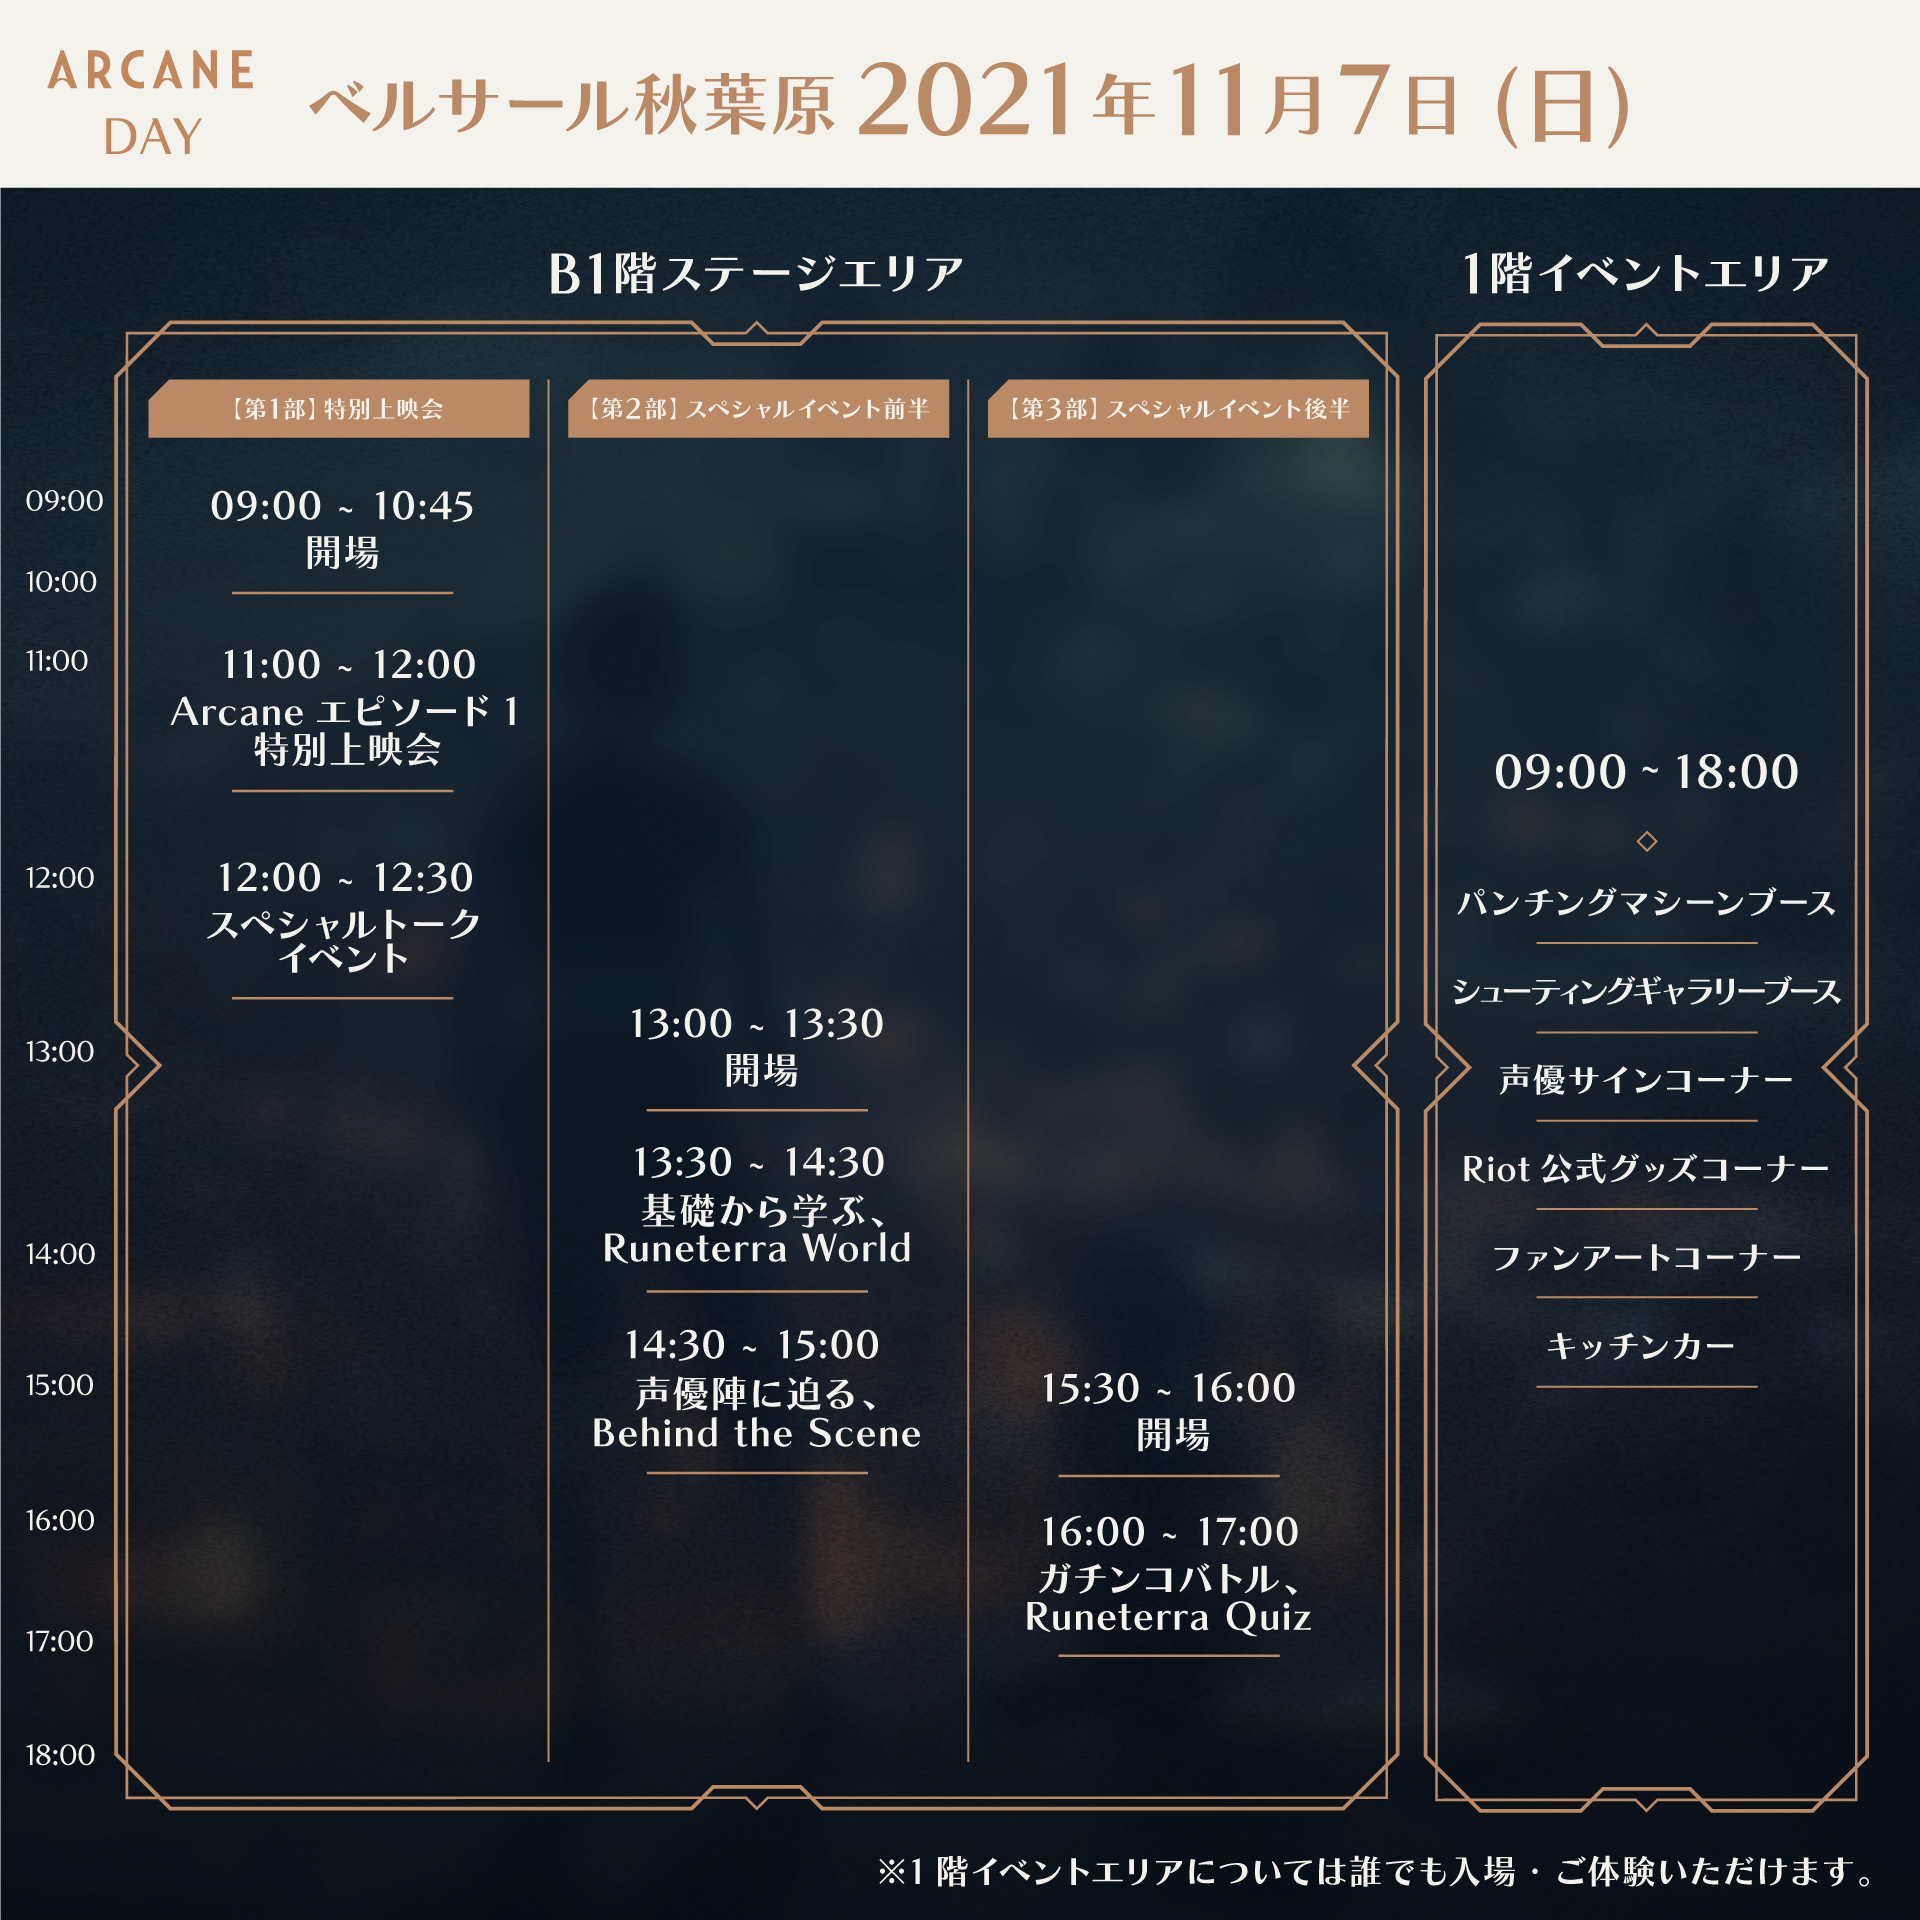 Arcane-day_Schedule_press-release_211029.png